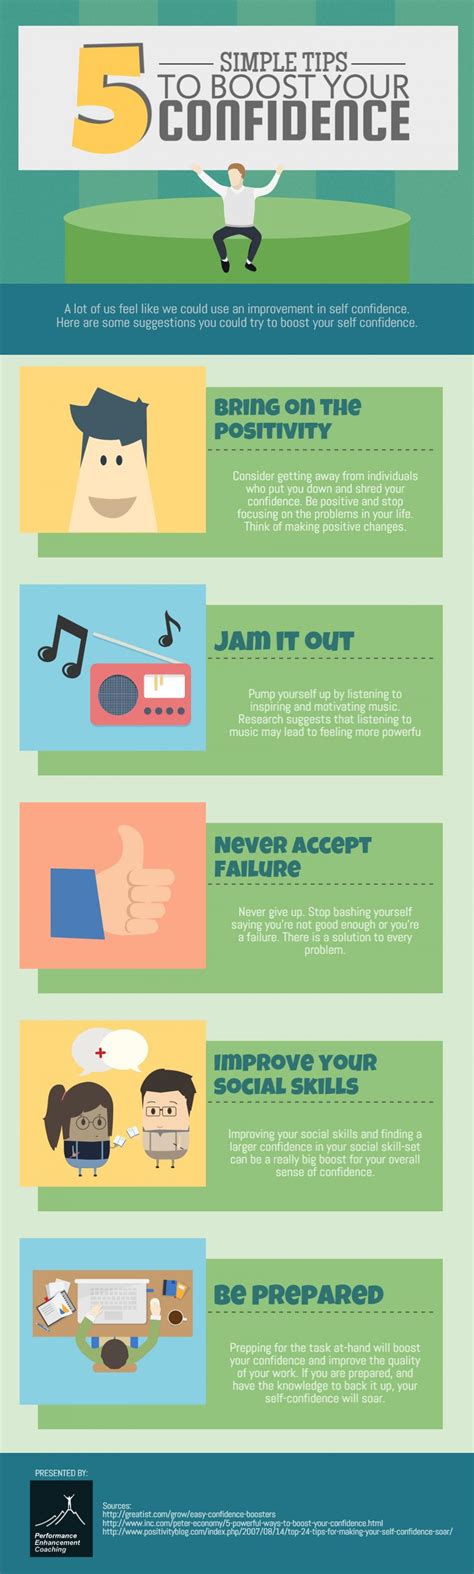 5 Tips To Boost Your Confidence Infographic Counseling Toolbox Board Of Secondary Education